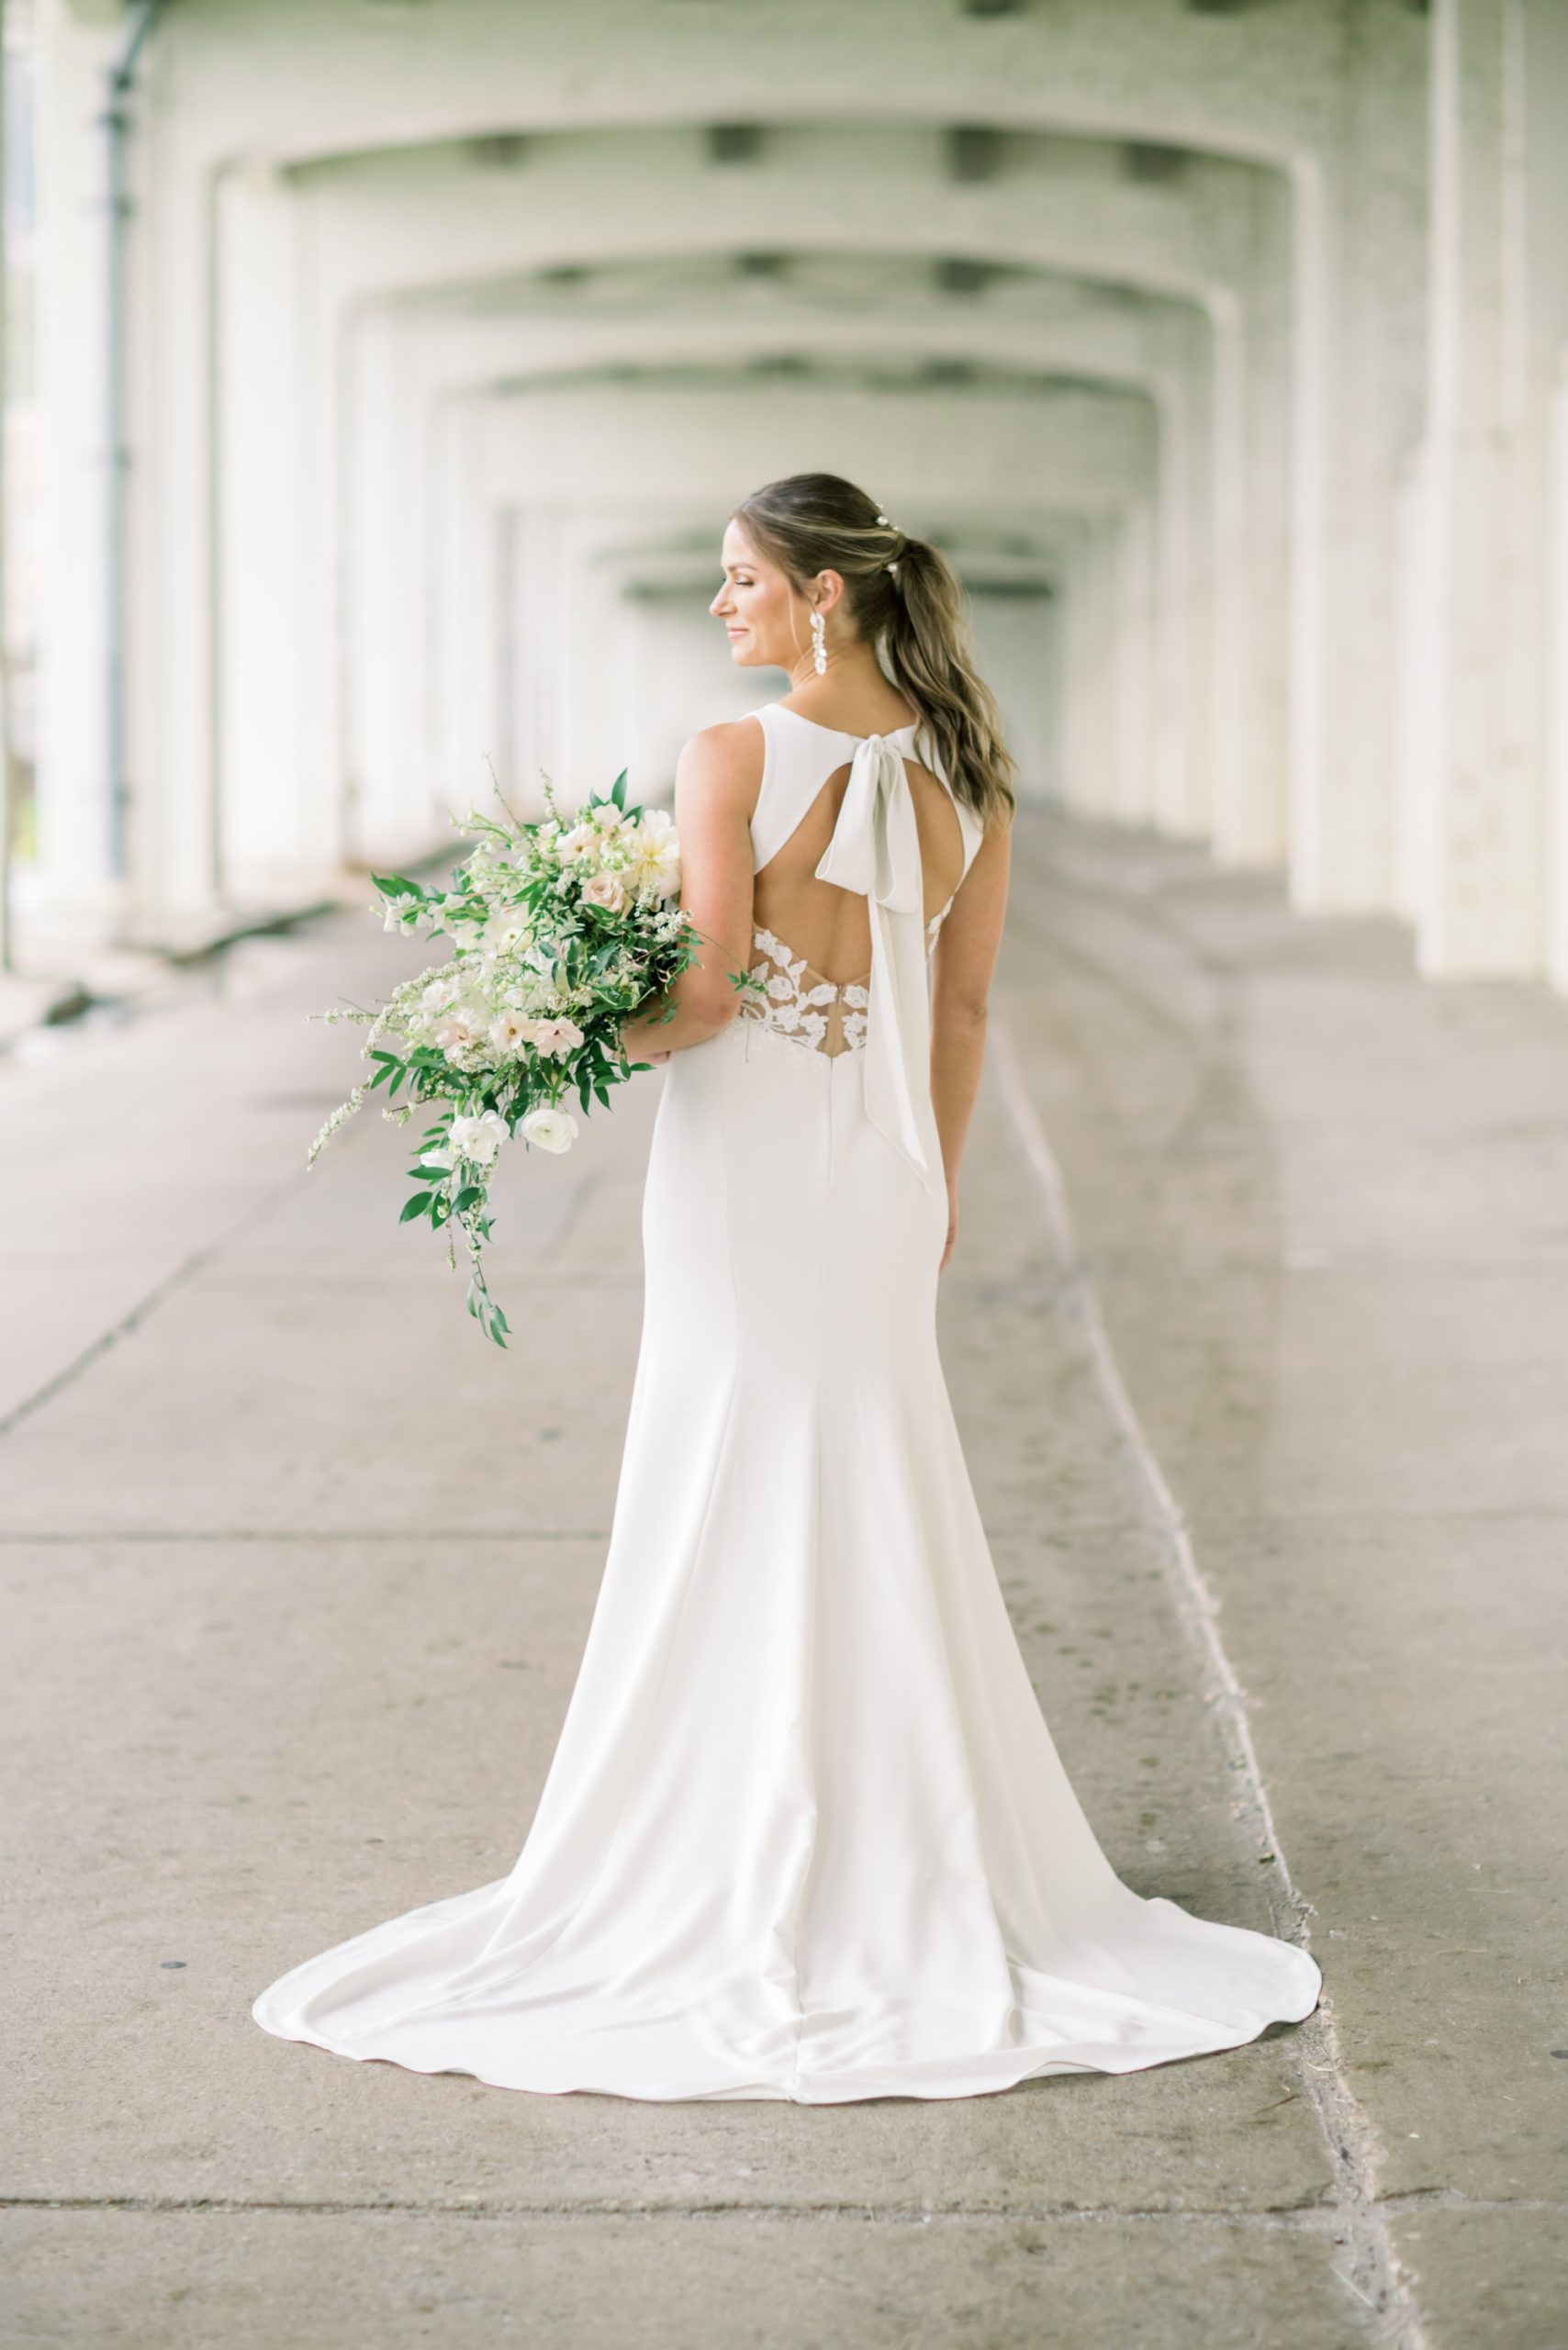 A bride poses with her back towards the camera while holding a gorgeous wedding bouquet